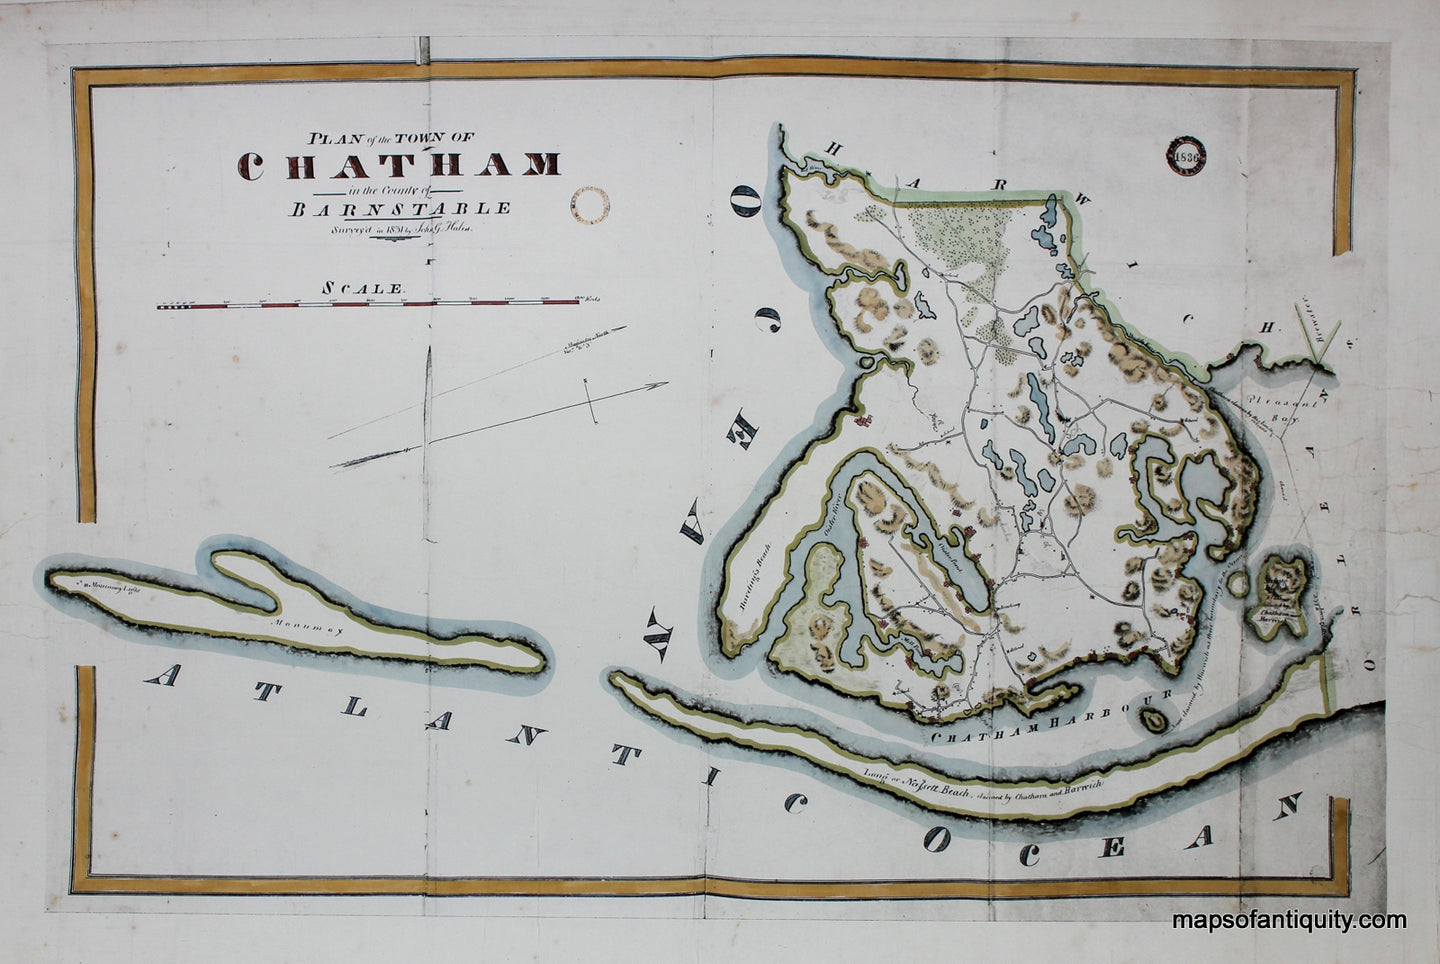 Hand-Colored-Reproduction-Plan-of-the-Town-of-Chatham-in-the-County-of-Barnstable-Surveyed-in-1831-by-John-Hales.-(High-quality-hand-colored-reproduction).-Reproductions-Cape-Cod-and-Islands-Chatham-Reproductions-Reproduction--Maps-Of-Antiquity